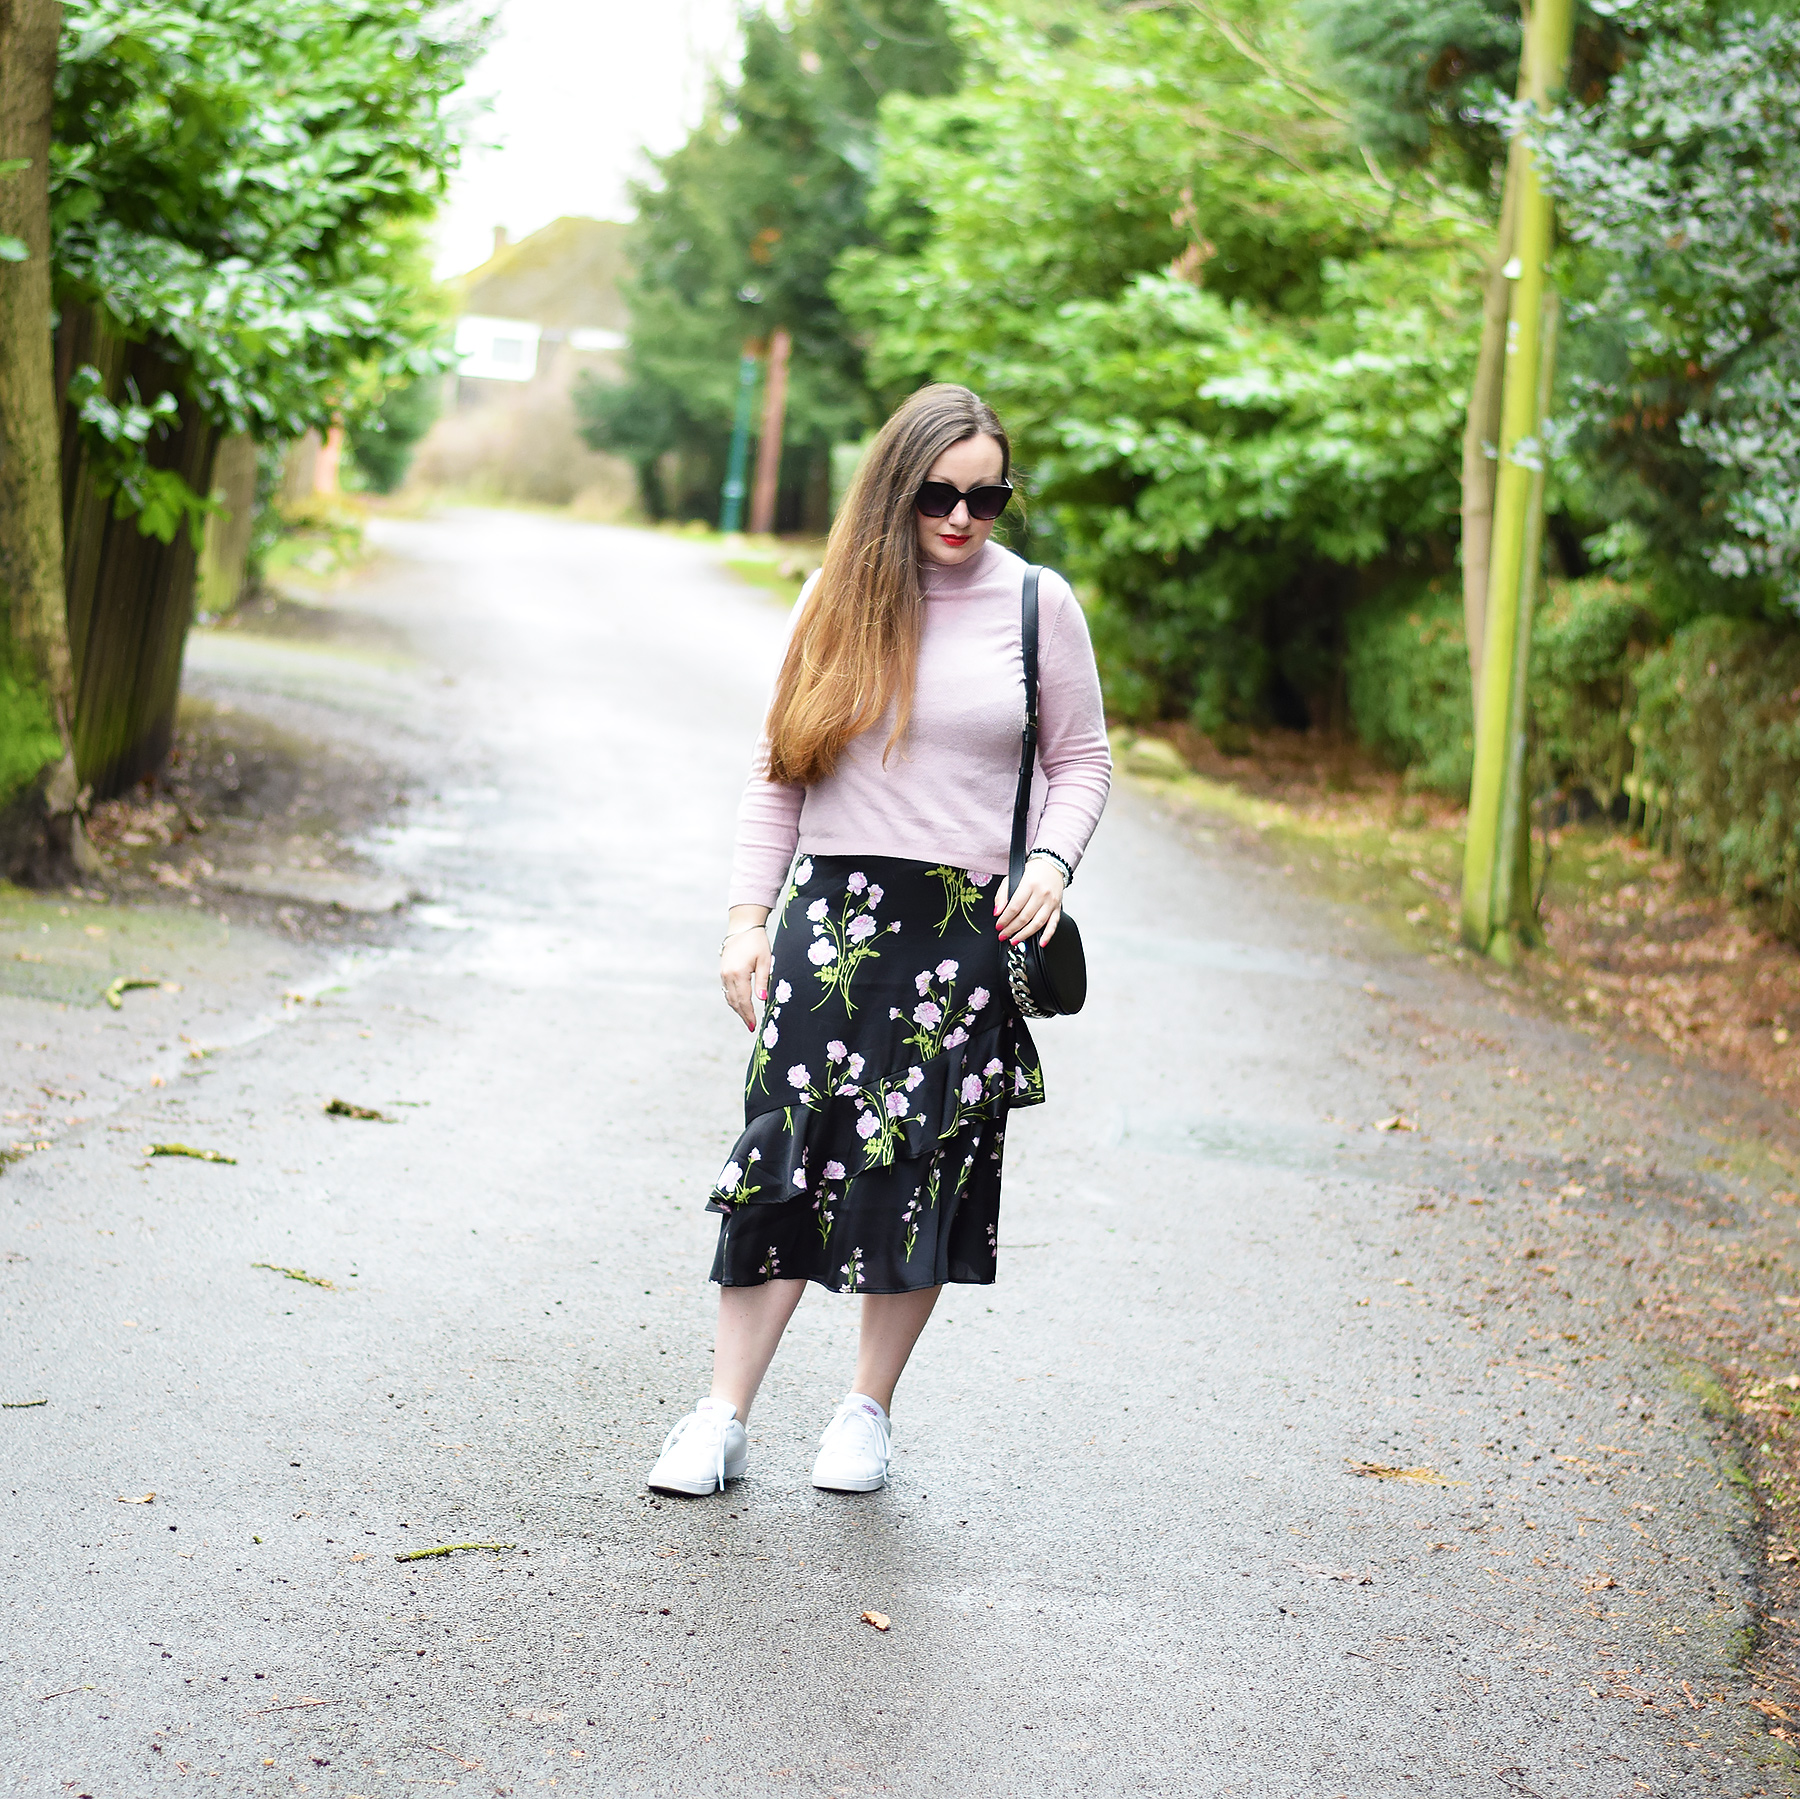 HOW TO WEAR A DRESSY SKIRT CASUALLY